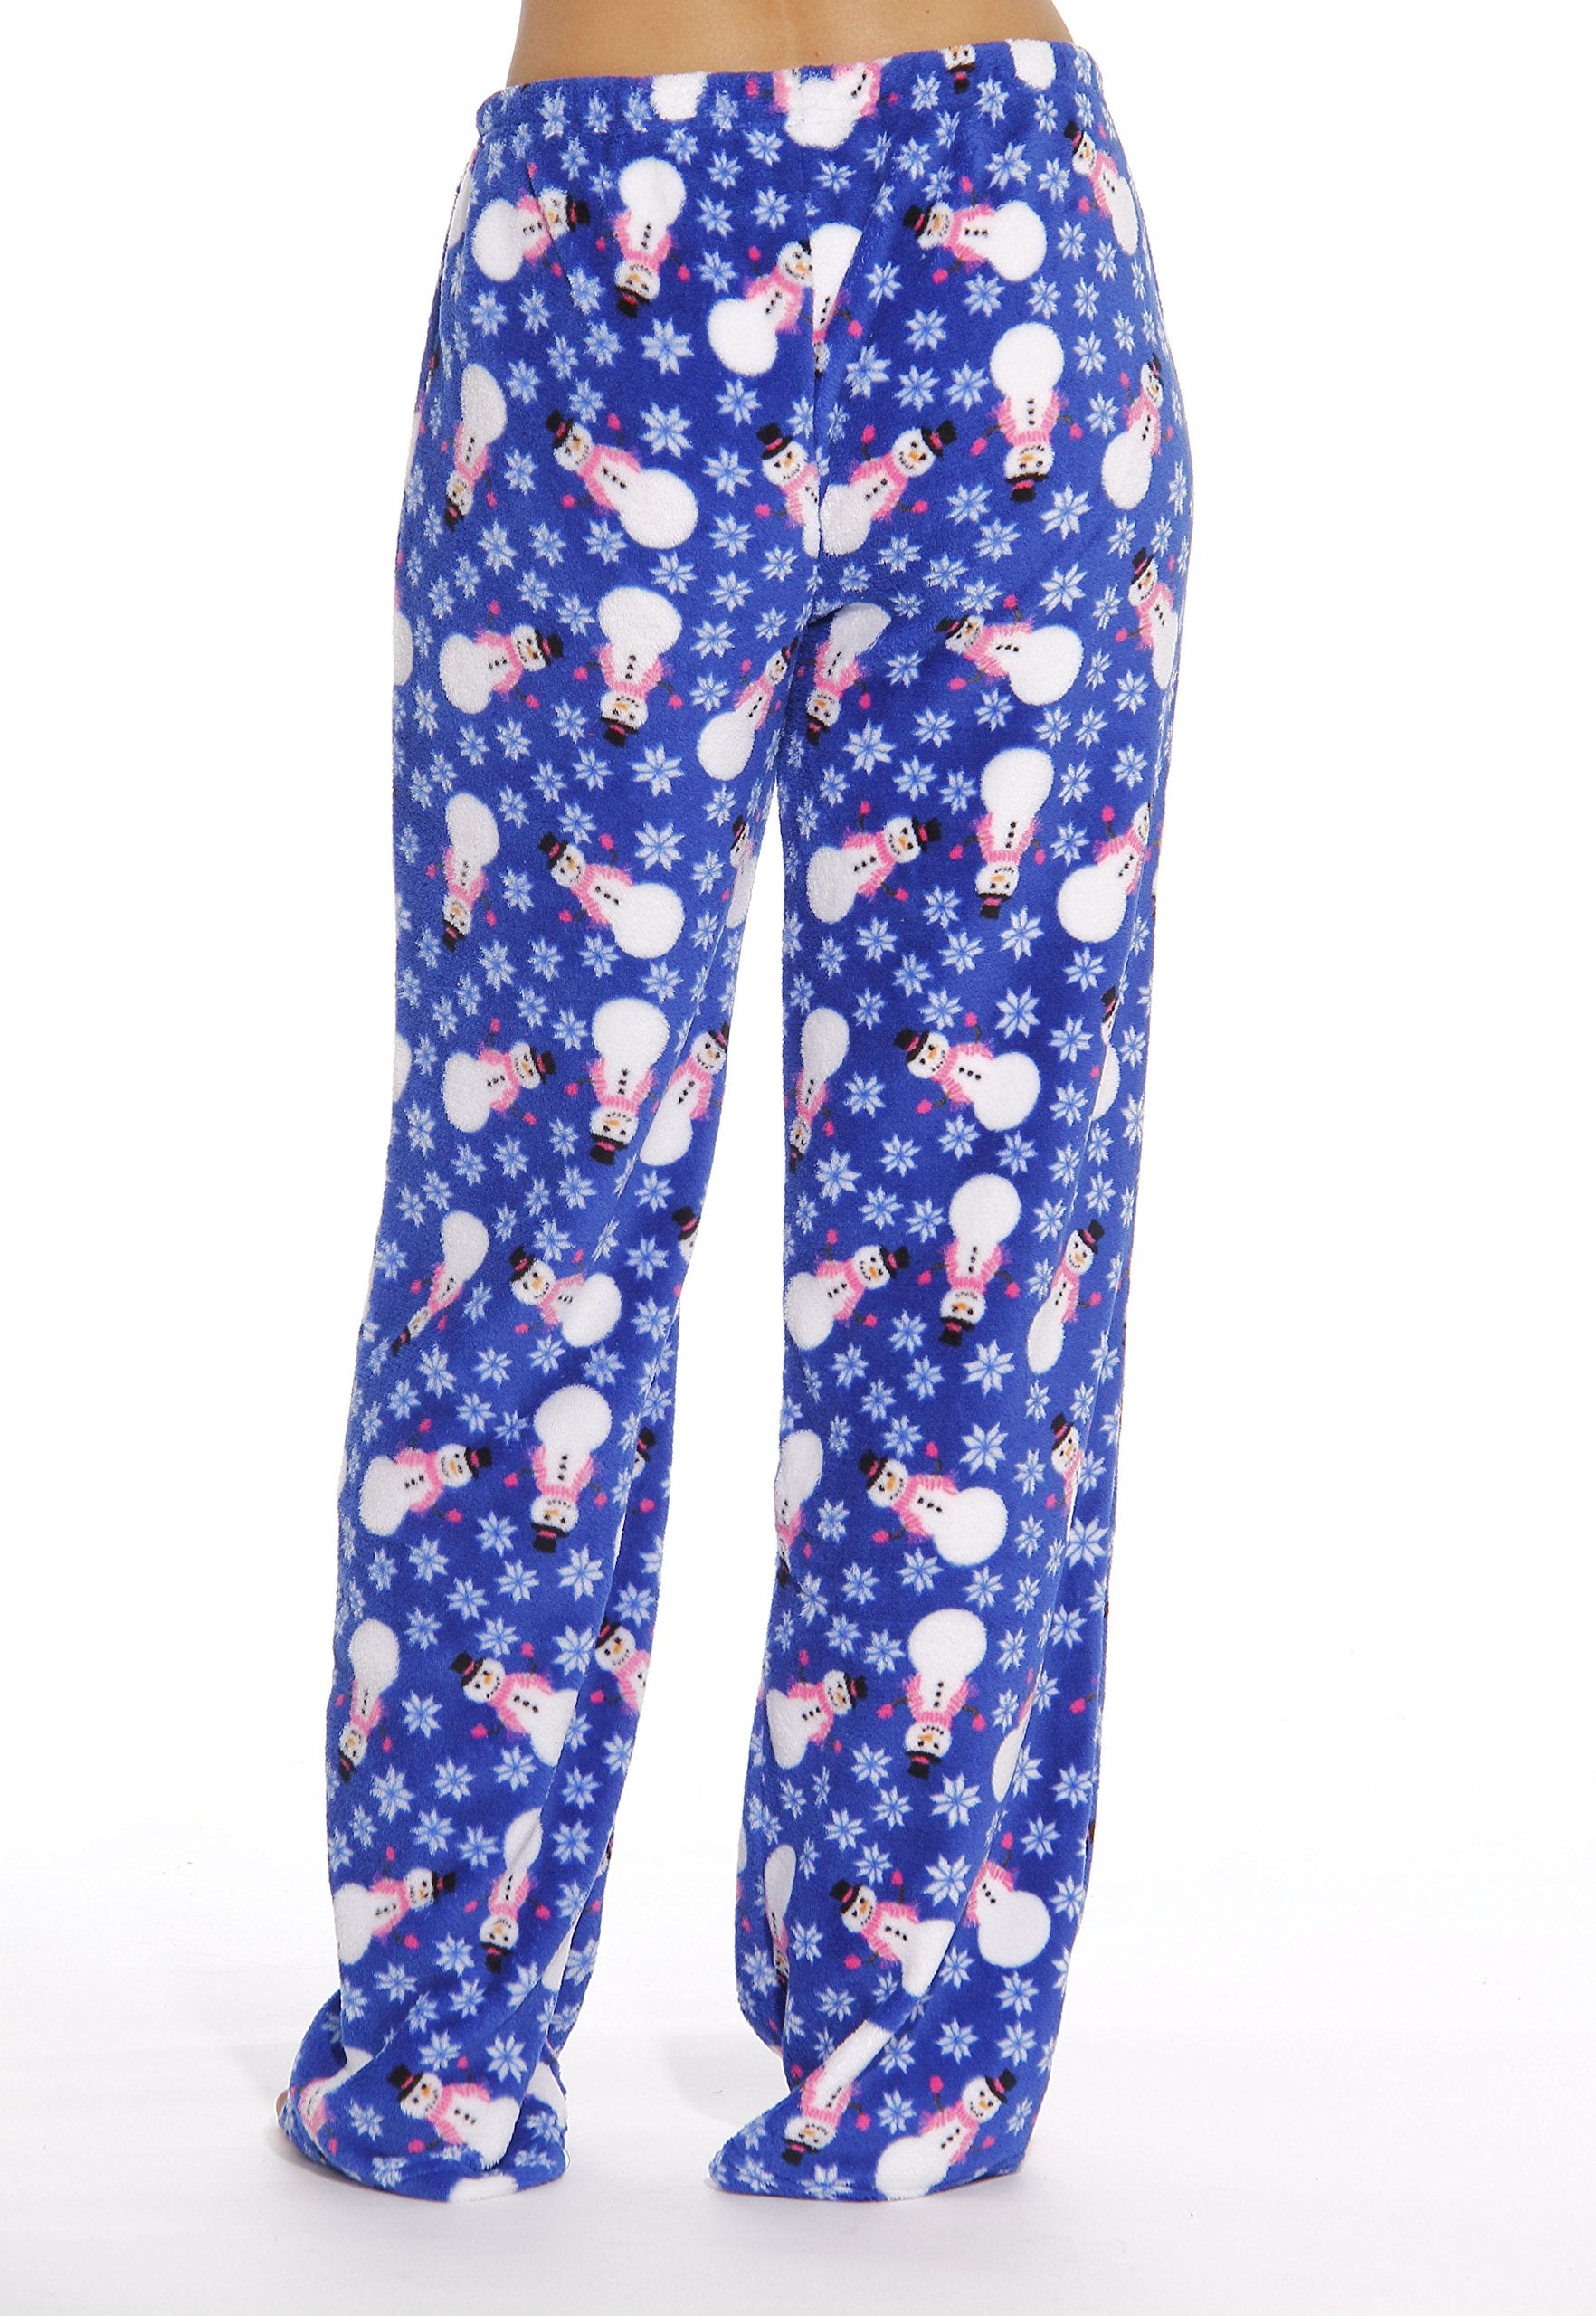 Just Love Women's Plush Pajama Pants - Soft and Cozy Lounge Pants in ...